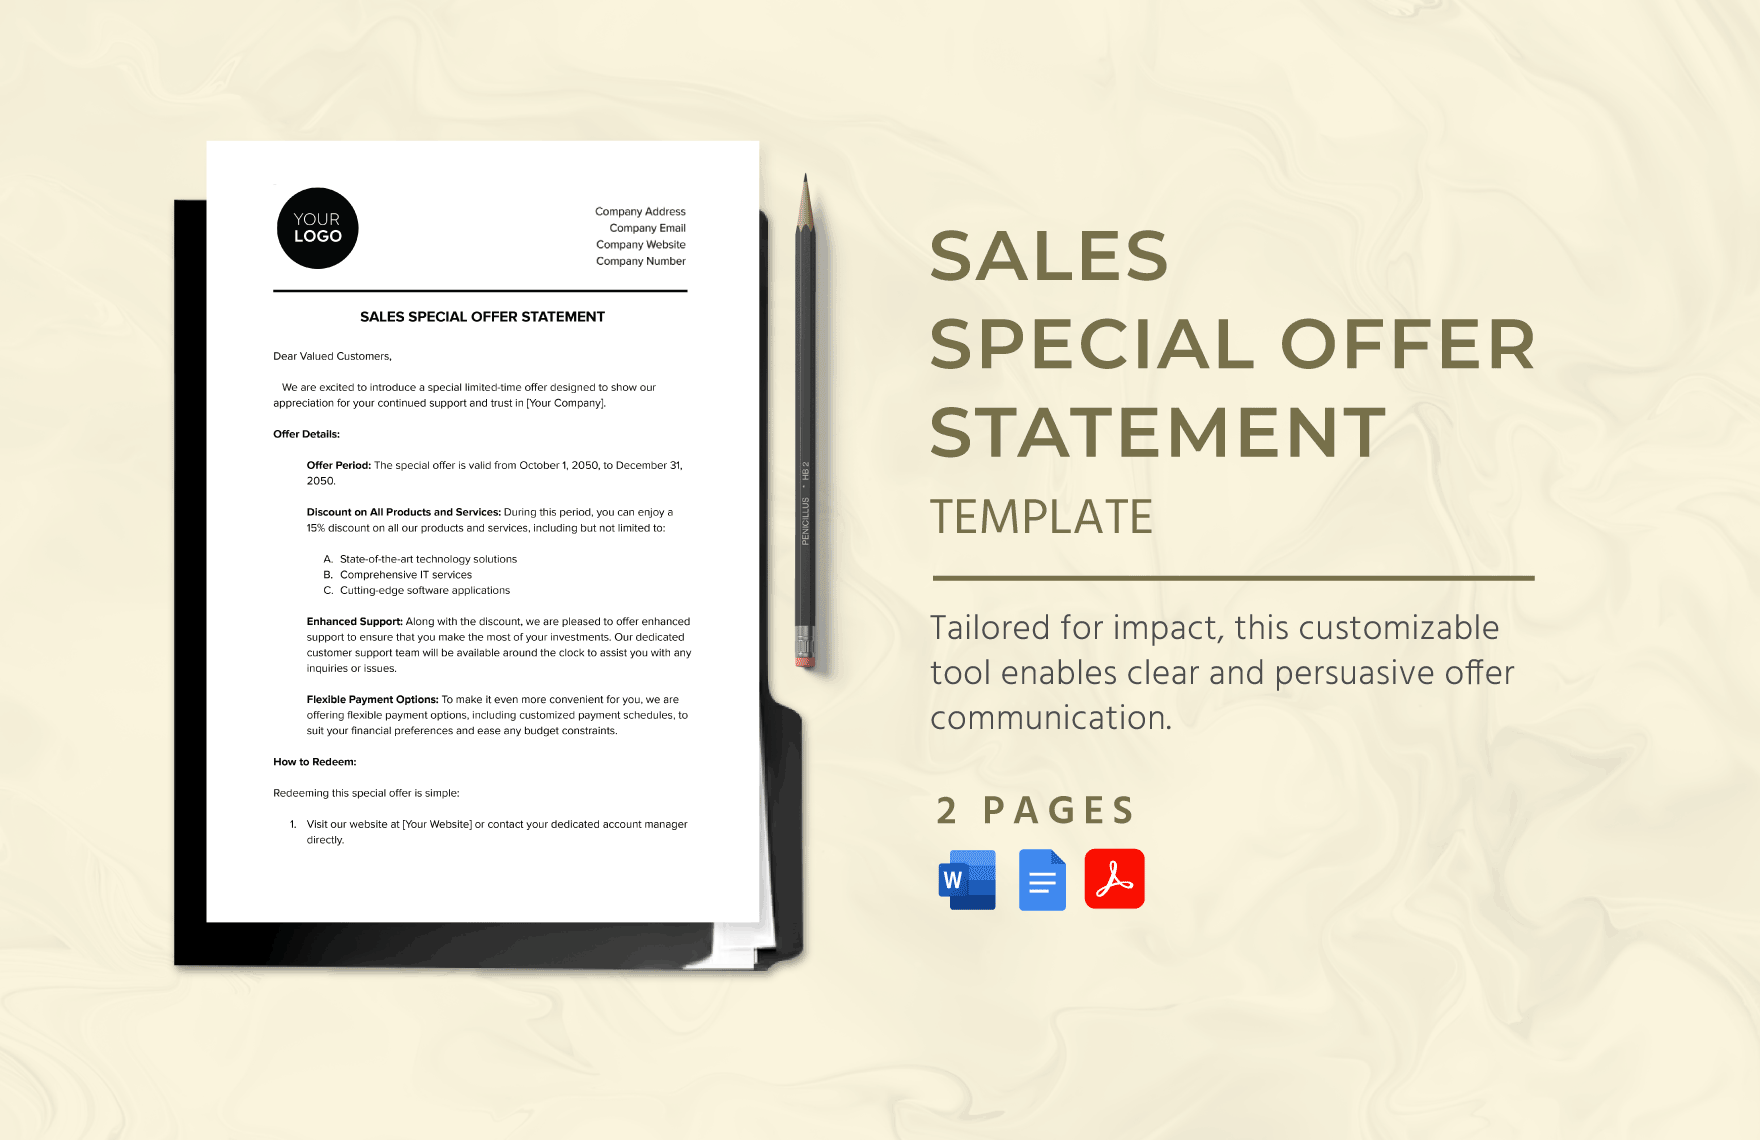 Sales Special Offer Statement Template in Word, Google Docs, PDF